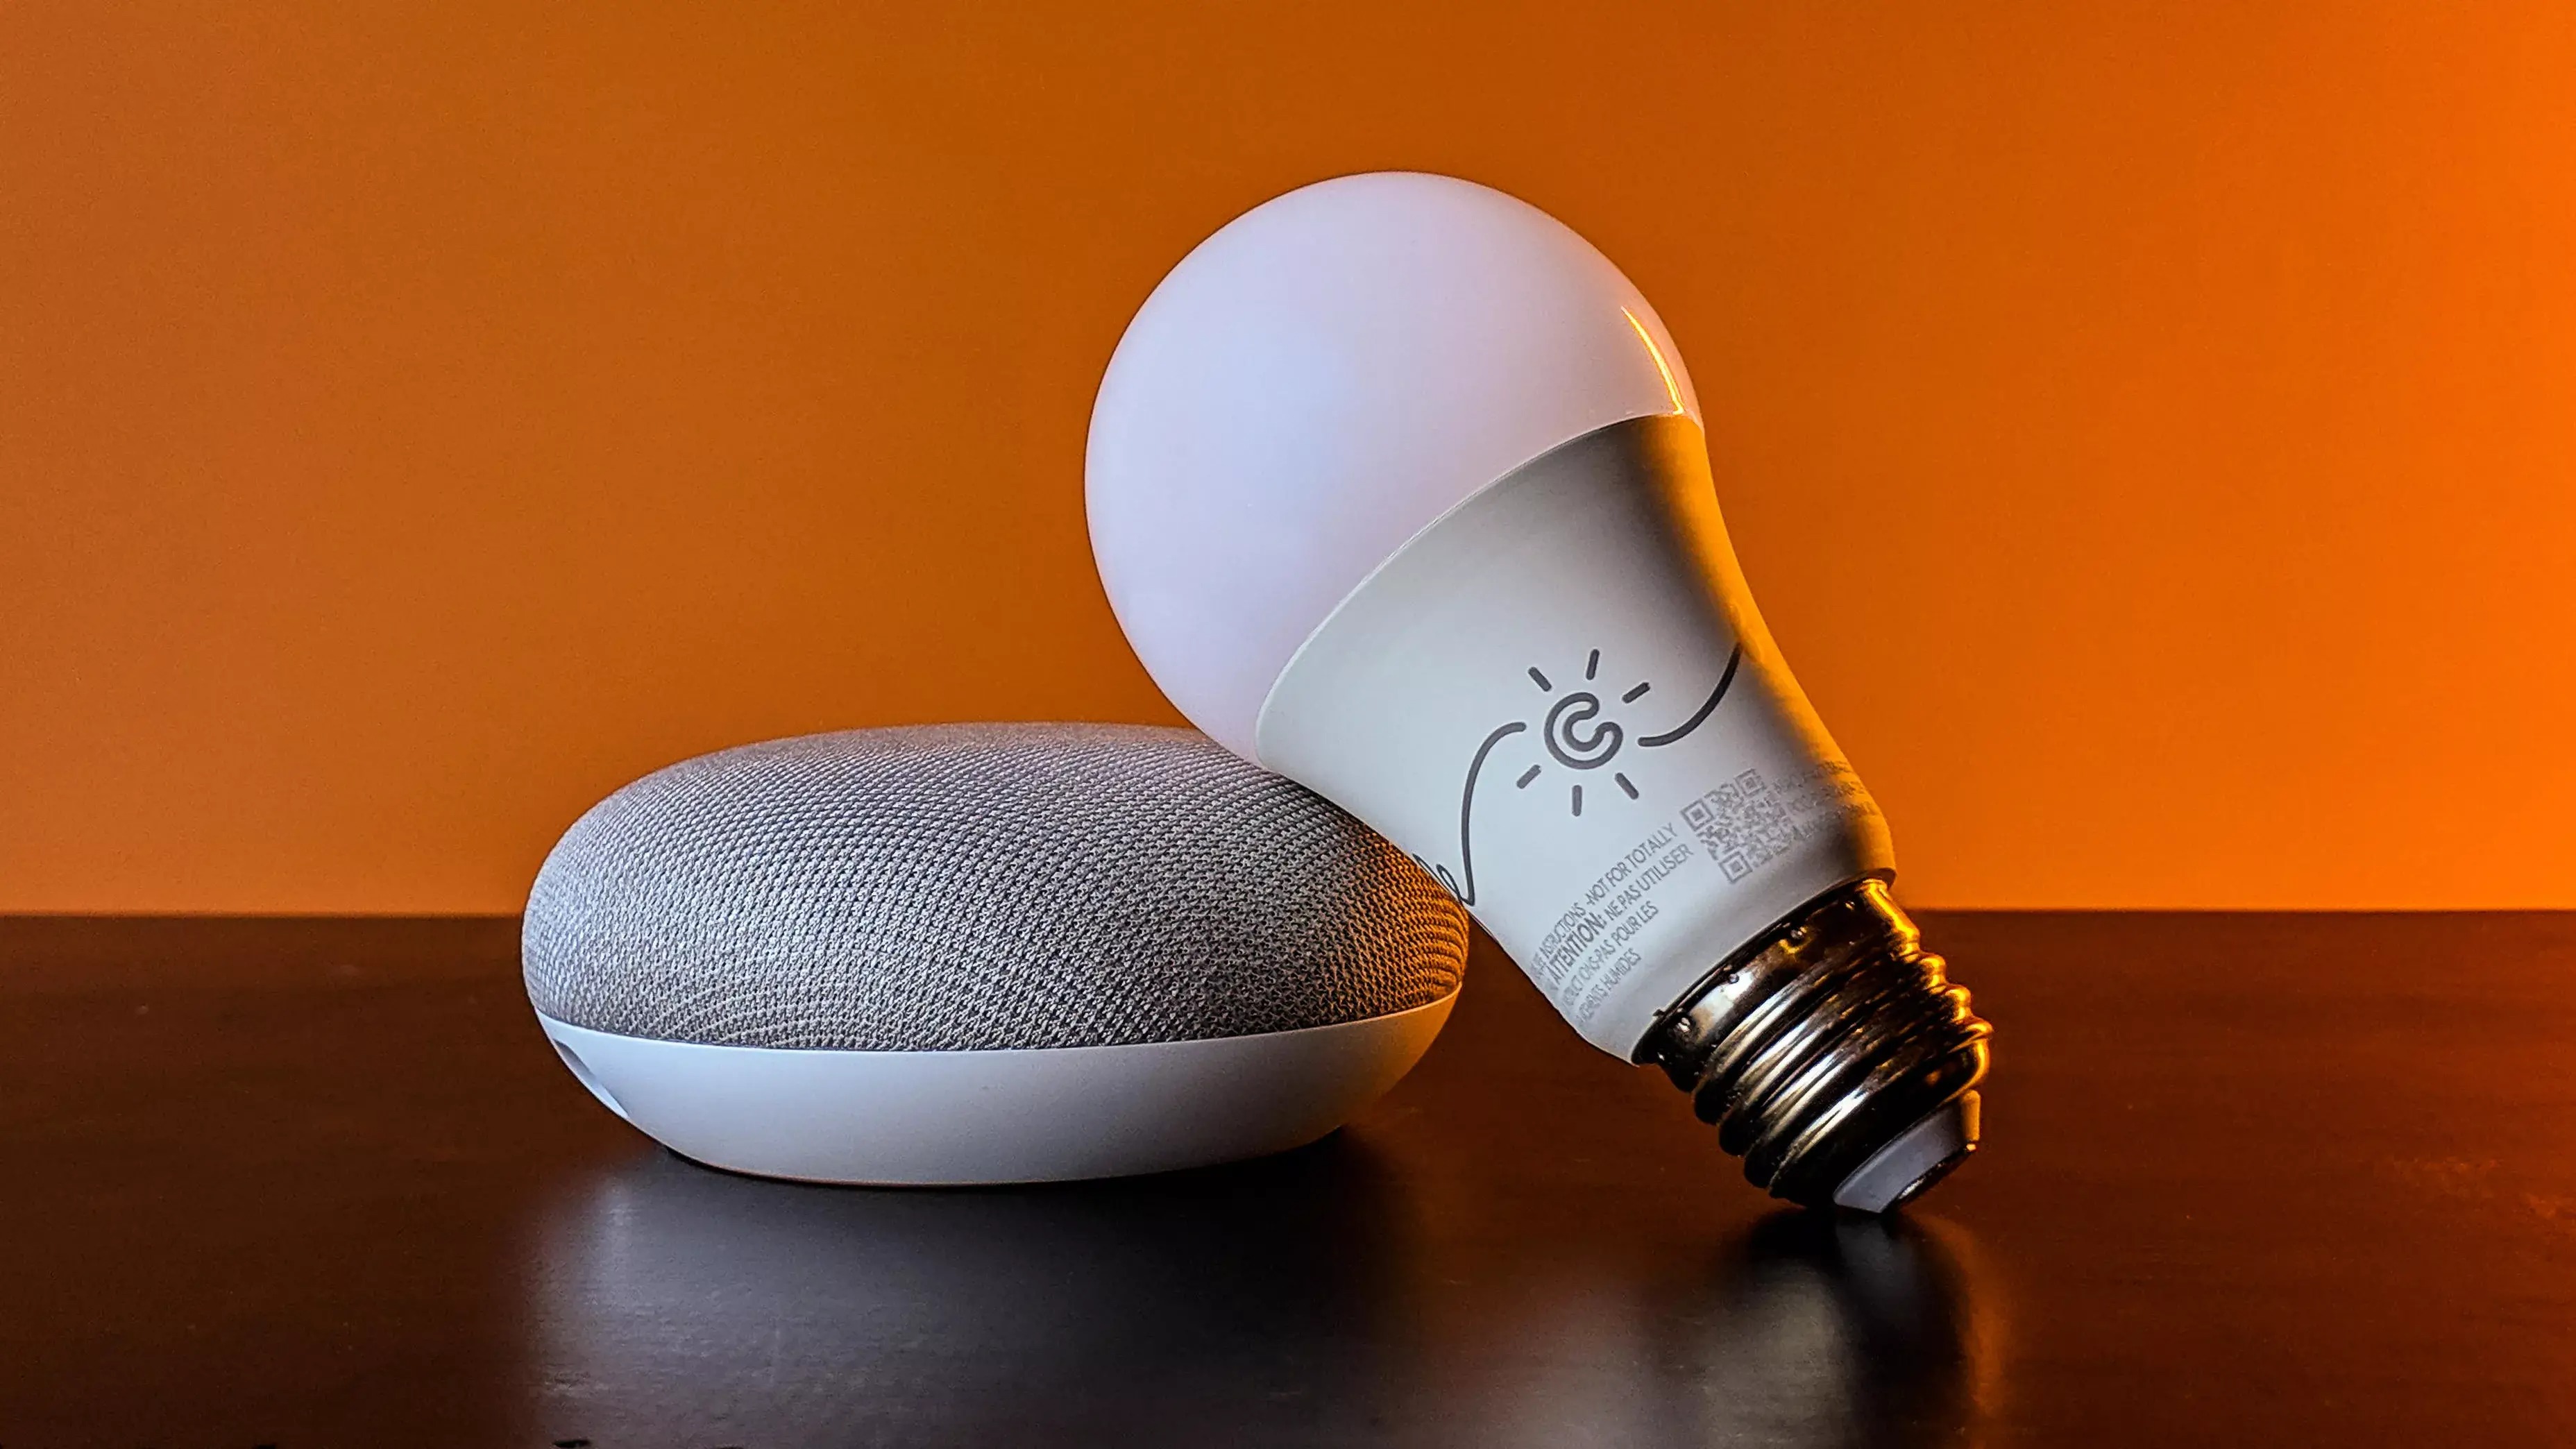 How To Connect Google Home To Smart Lights